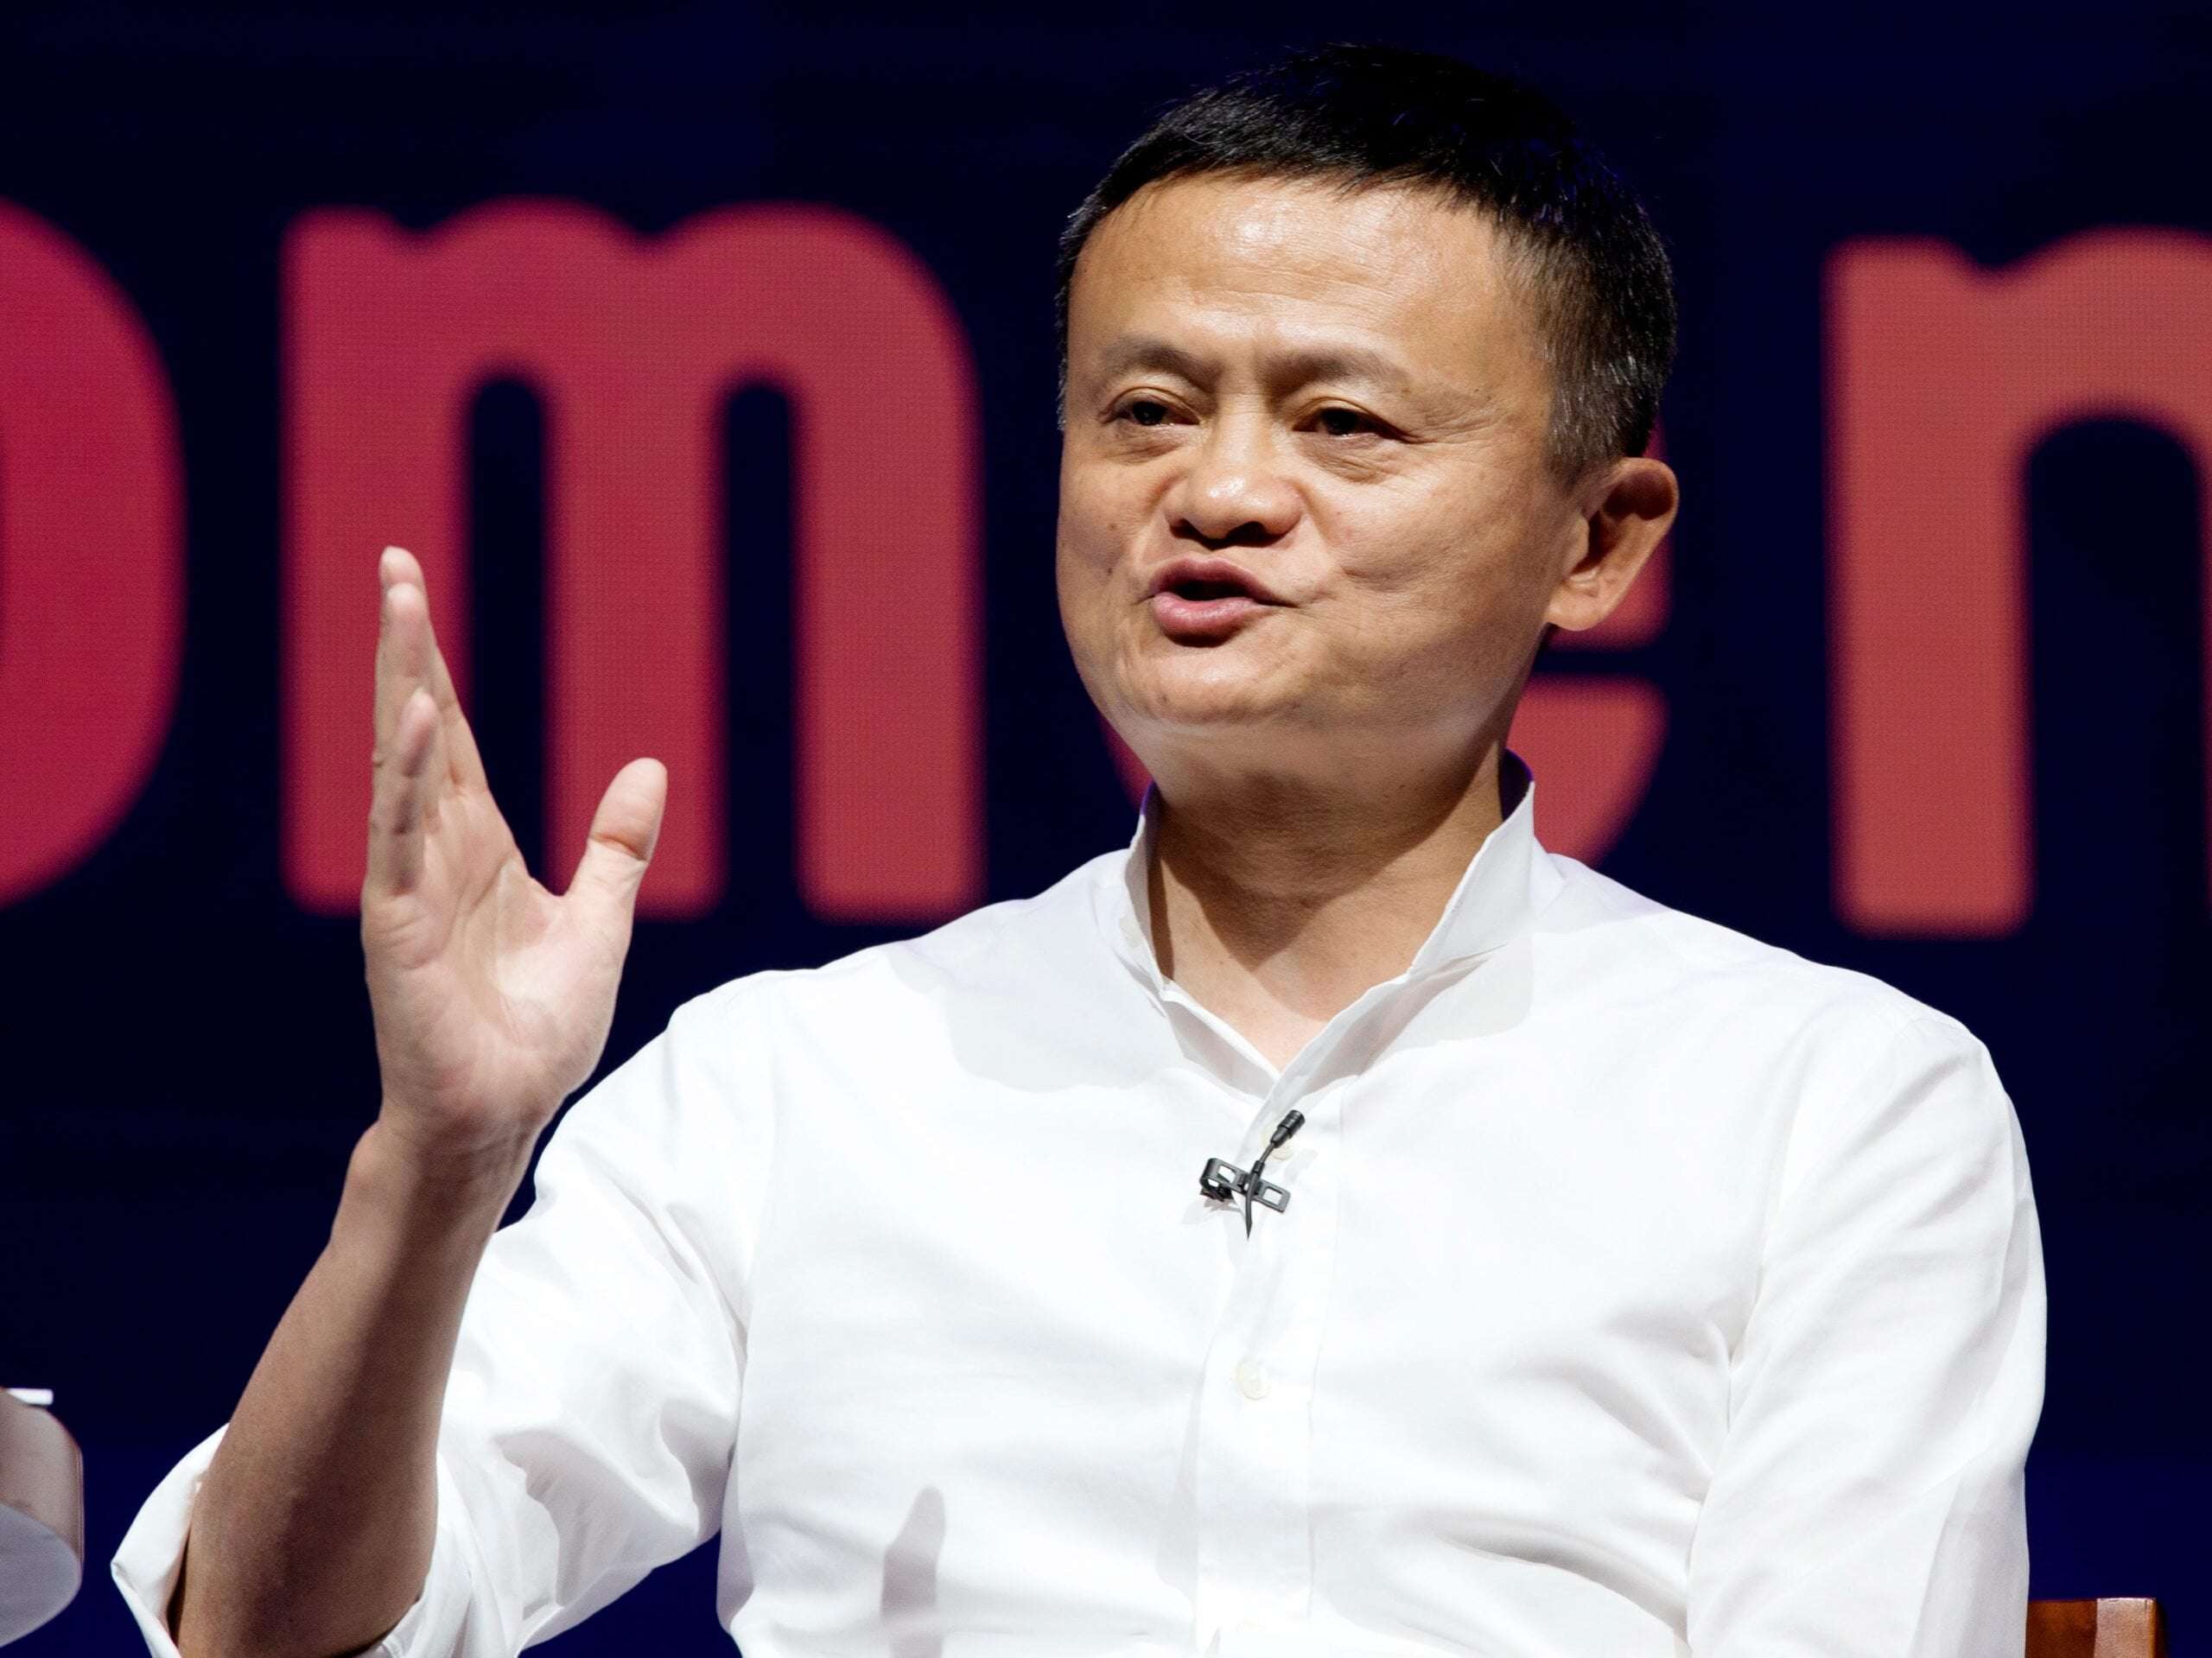 image for Jack Ma, the billionaire co-founder of Alibaba who disappeared from public life in 2020, has taken up a teaching role in Japan